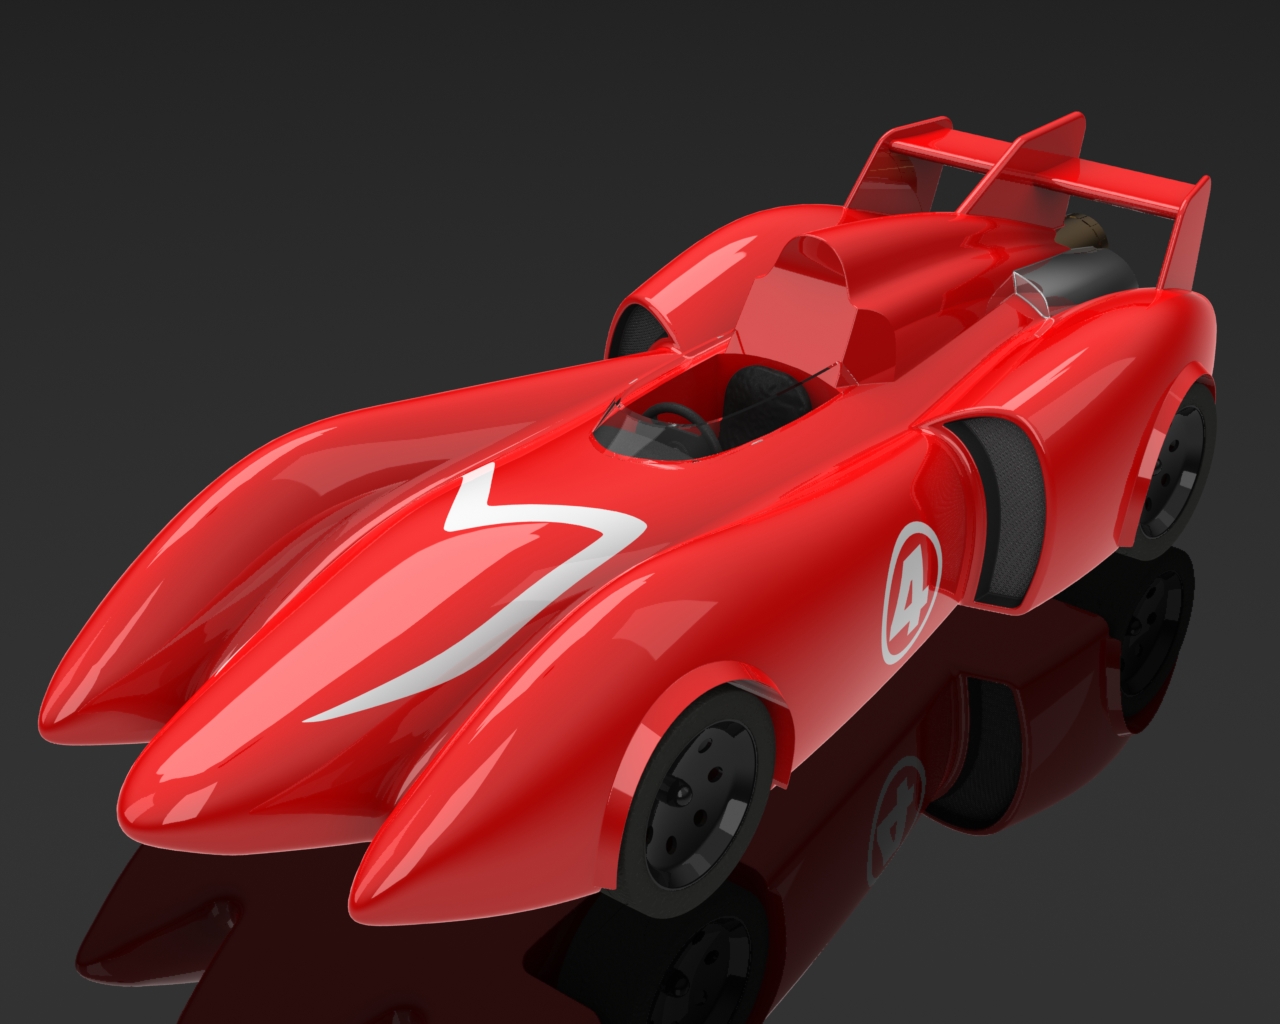 Only 3 Days Left to Submit Your Mach 4 Rendering!